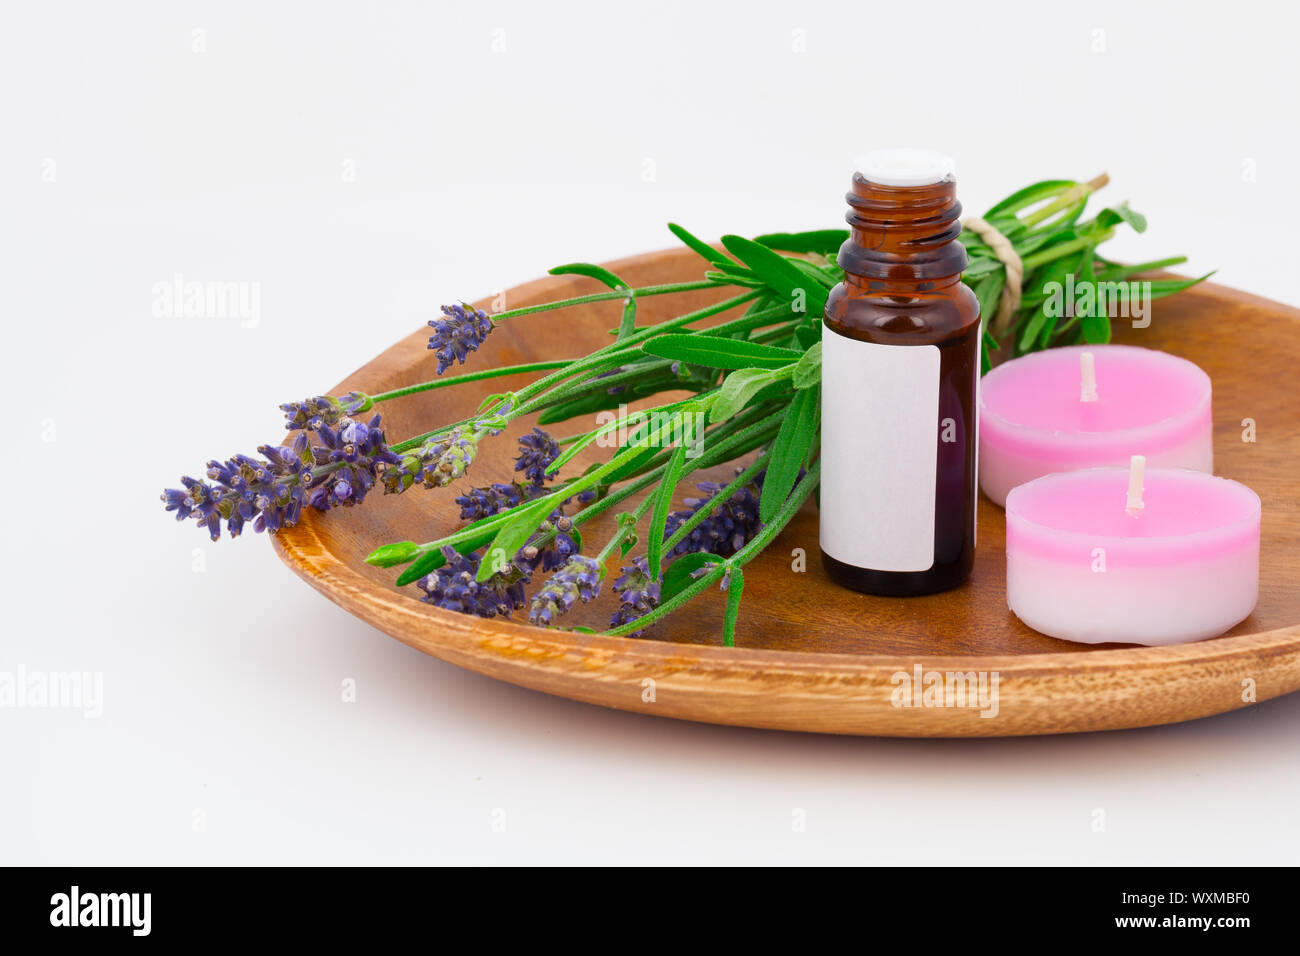 Aromatherapy Lavender oil and lavender flower in the wooden bowl, isolated on white background Stock Photo